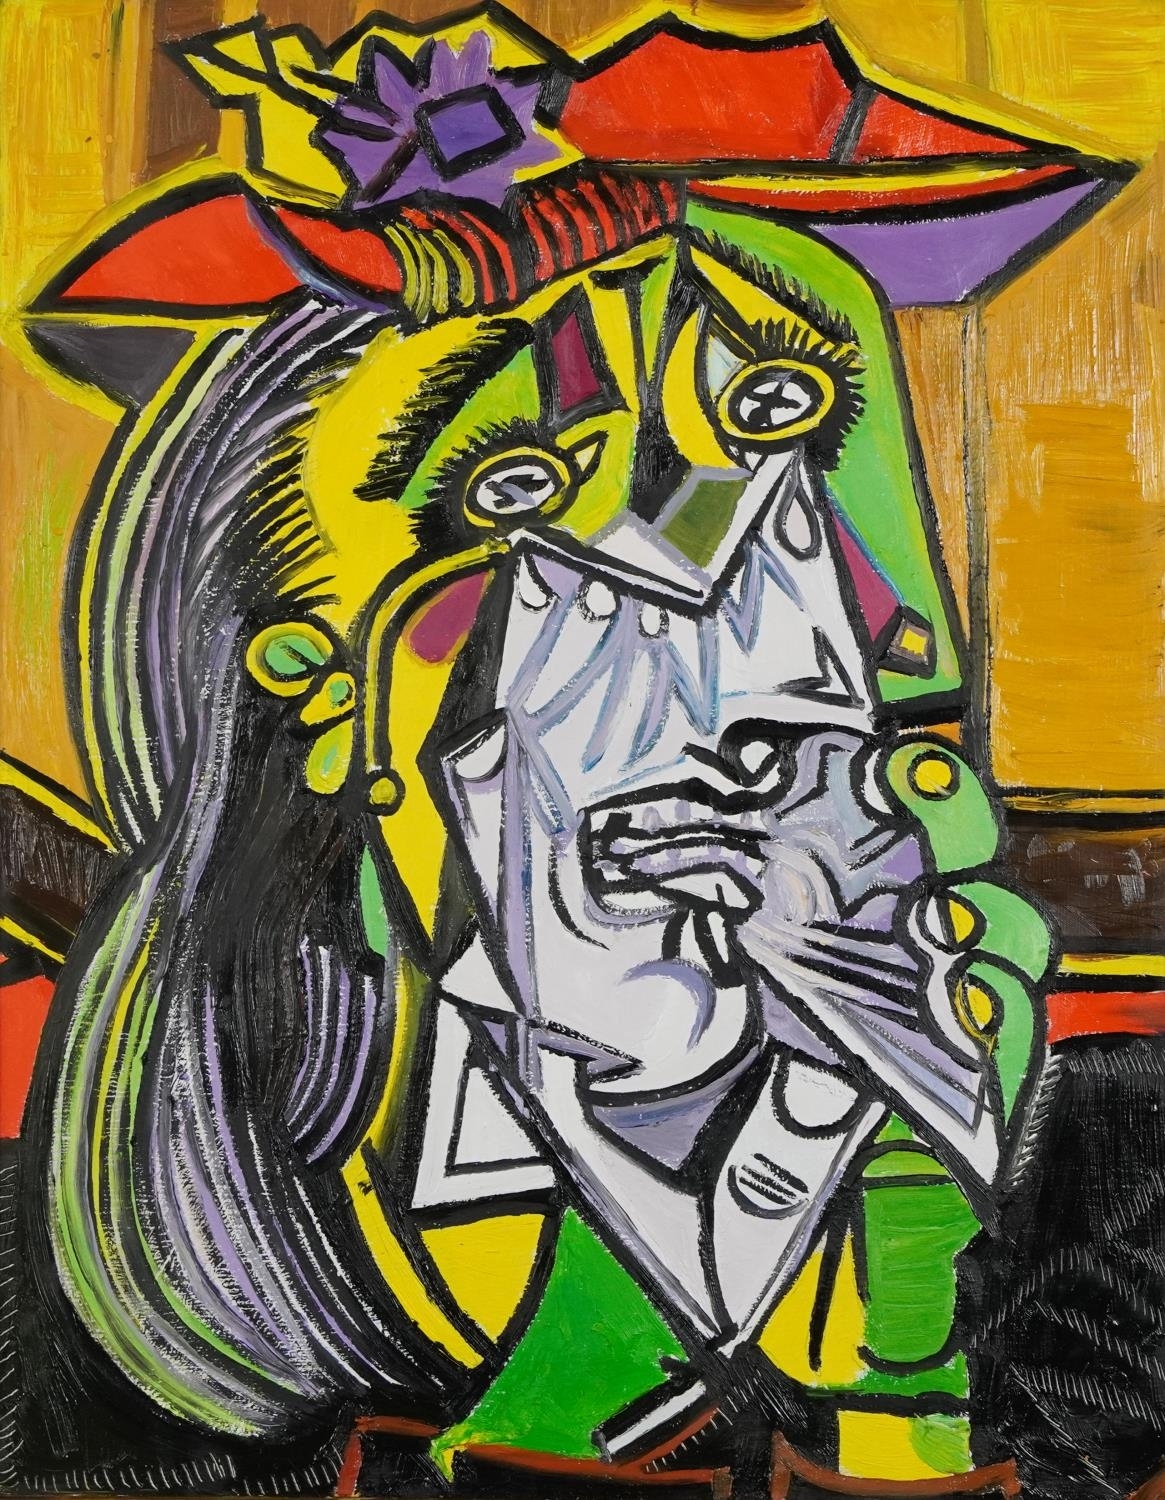 The Weeping Woman by Pablo Picasso, Clive Fredriksson